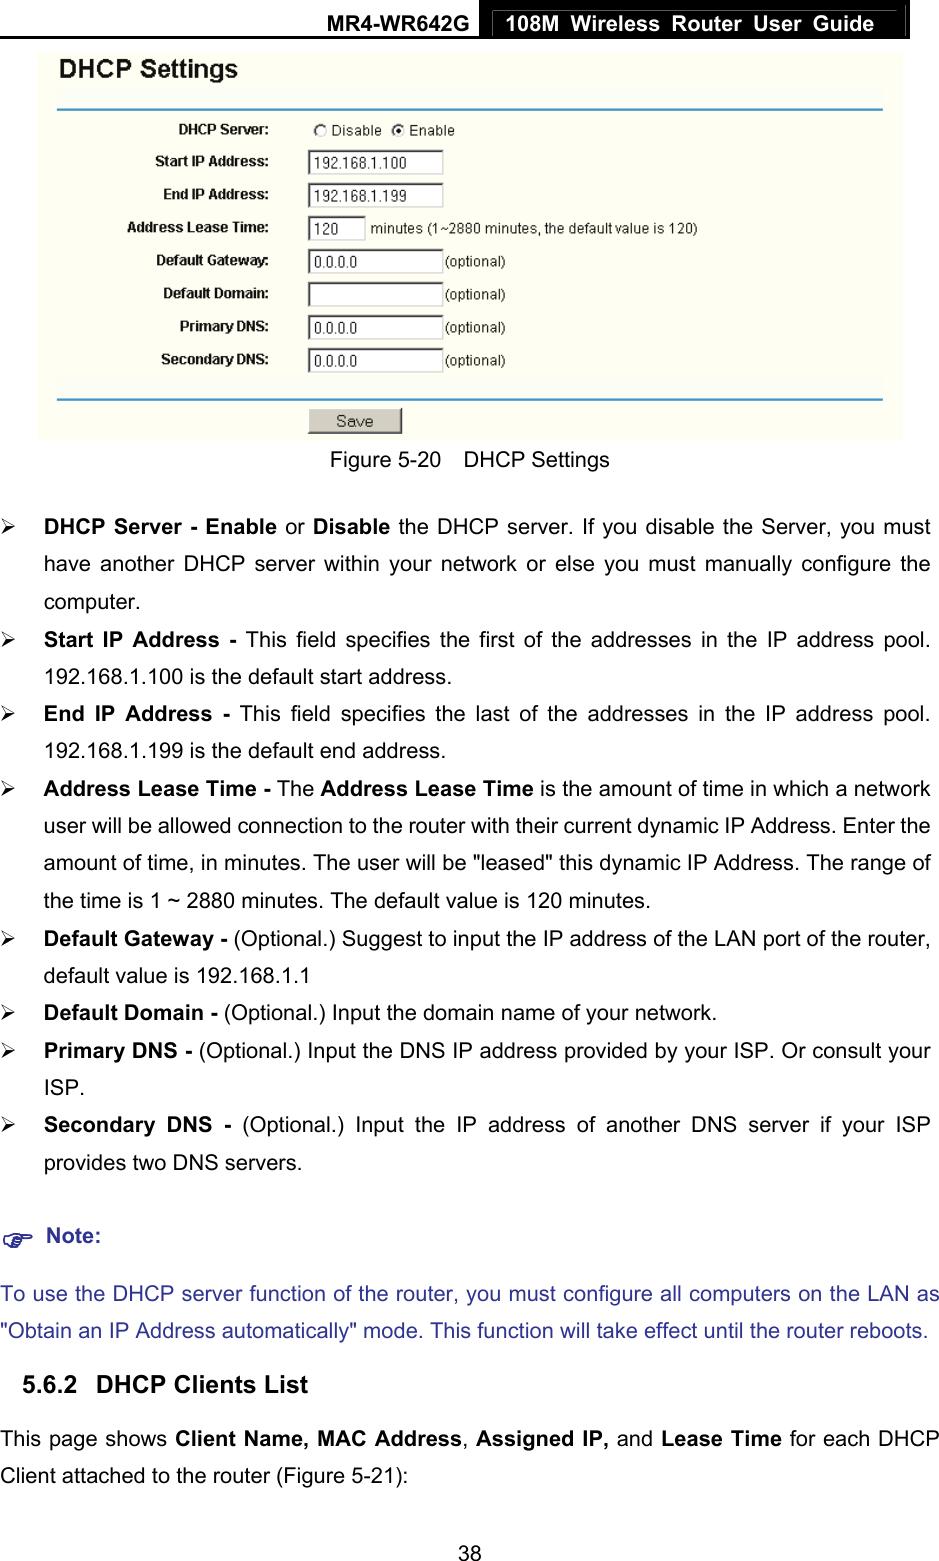 MR4-WR642G 108M Wireless Router User Guide   38 Figure 5-20  DHCP Settings ¾ DHCP Server - Enable or Disable the DHCP server. If you disable the Server, you must have another DHCP server within your network or else you must manually configure the computer. ¾ Start IP Address - This field specifies the first of the addresses in the IP address pool. 192.168.1.100 is the default start address. ¾ End IP Address - This field specifies the last of the addresses in the IP address pool. 192.168.1.199 is the default end address. ¾ Address Lease Time - The Address Lease Time is the amount of time in which a network user will be allowed connection to the router with their current dynamic IP Address. Enter the amount of time, in minutes. The user will be &quot;leased&quot; this dynamic IP Address. The range of the time is 1 ~ 2880 minutes. The default value is 120 minutes. ¾ Default Gateway - (Optional.) Suggest to input the IP address of the LAN port of the router, default value is 192.168.1.1 ¾ Default Domain - (Optional.) Input the domain name of your network. ¾ Primary DNS - (Optional.) Input the DNS IP address provided by your ISP. Or consult your ISP. ¾ Secondary DNS - (Optional.) Input the IP address of another DNS server if your ISP provides two DNS servers. ) Note: To use the DHCP server function of the router, you must configure all computers on the LAN as &quot;Obtain an IP Address automatically&quot; mode. This function will take effect until the router reboots. 5.6.2  DHCP Clients List This page shows Client Name, MAC Address, Assigned IP, and Lease Time for each DHCP Client attached to the router (Figure 5-21): 